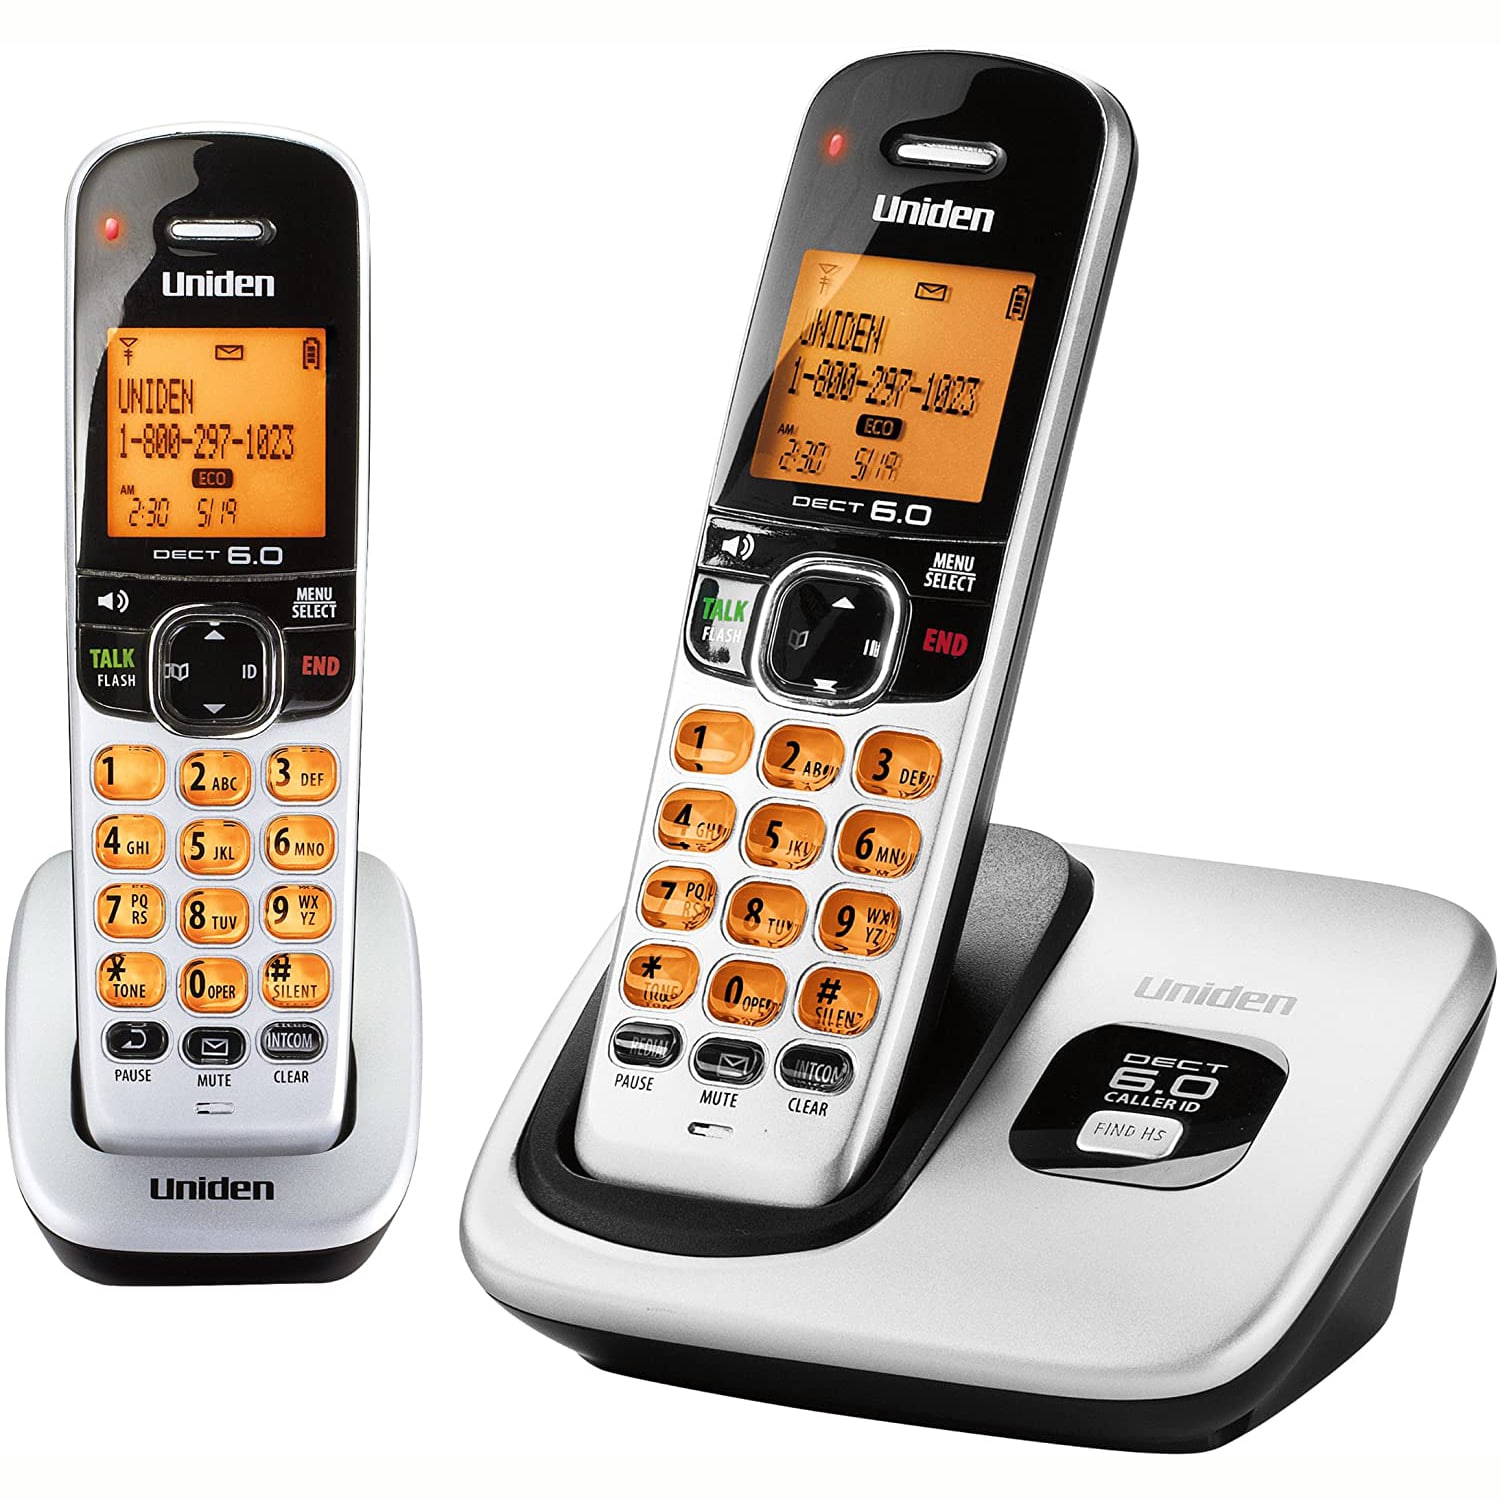 Top 10 Best Bluetooth Cordless Phones in 2021 Reviews Guide